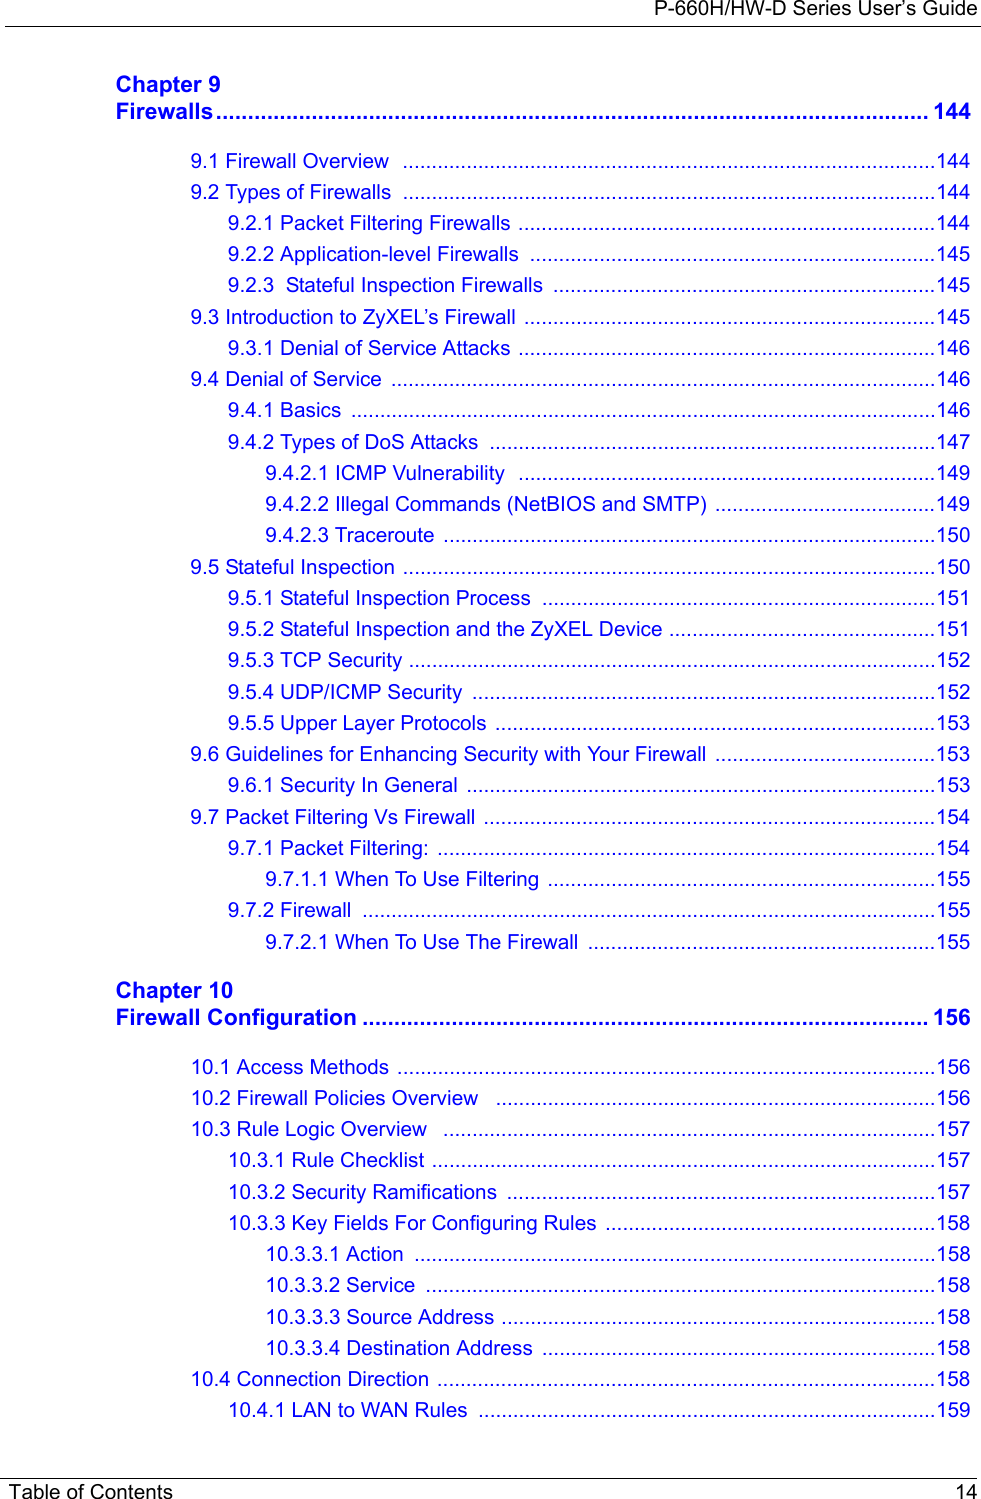 P-660H/HW-D Series User’s GuideTable of Contents 14Chapter 9Firewalls................................................................................................................ 1449.1 Firewall Overview  ............................................................................................1449.2 Types of Firewalls  ............................................................................................1449.2.1 Packet Filtering Firewalls ........................................................................1449.2.2 Application-level Firewalls  ......................................................................1459.2.3  Stateful Inspection Firewalls  ..................................................................1459.3 Introduction to ZyXEL’s Firewall .......................................................................1459.3.1 Denial of Service Attacks ........................................................................1469.4 Denial of Service  ..............................................................................................1469.4.1 Basics  .....................................................................................................1469.4.2 Types of DoS Attacks  .............................................................................1479.4.2.1 ICMP Vulnerability  ........................................................................1499.4.2.2 Illegal Commands (NetBIOS and SMTP)  ......................................1499.4.2.3 Traceroute  .....................................................................................1509.5 Stateful Inspection ............................................................................................1509.5.1 Stateful Inspection Process  ....................................................................1519.5.2 Stateful Inspection and the ZyXEL Device ..............................................1519.5.3 TCP Security ...........................................................................................1529.5.4 UDP/ICMP Security  ................................................................................1529.5.5 Upper Layer Protocols  ............................................................................1539.6 Guidelines for Enhancing Security with Your Firewall  ......................................1539.6.1 Security In General  .................................................................................1539.7 Packet Filtering Vs Firewall  ..............................................................................1549.7.1 Packet Filtering:  ......................................................................................1549.7.1.1 When To Use Filtering  ...................................................................1559.7.2 Firewall  ...................................................................................................1559.7.2.1 When To Use The Firewall  ............................................................155Chapter 10Firewall Configuration ......................................................................................... 15610.1 Access Methods .............................................................................................15610.2 Firewall Policies Overview   ............................................................................15610.3 Rule Logic Overview   .....................................................................................15710.3.1 Rule Checklist .......................................................................................15710.3.2 Security Ramifications  ..........................................................................15710.3.3 Key Fields For Configuring Rules  .........................................................15810.3.3.1 Action  ..........................................................................................15810.3.3.2 Service  ........................................................................................15810.3.3.3 Source Address ...........................................................................15810.3.3.4 Destination Address ....................................................................15810.4 Connection Direction ......................................................................................15810.4.1 LAN to WAN Rules  ...............................................................................159